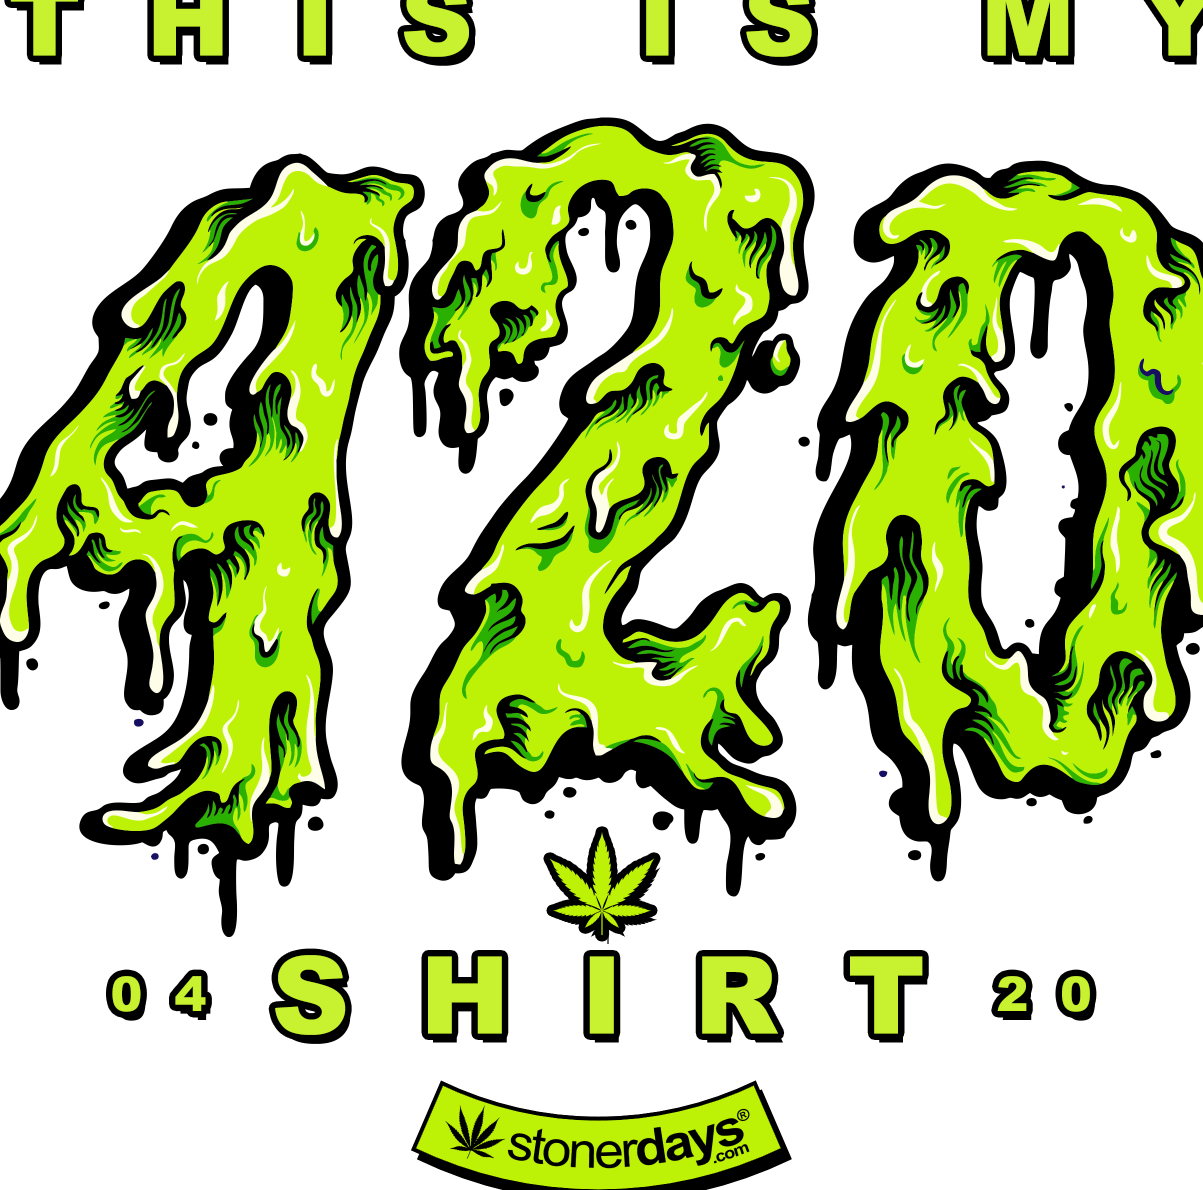 StonerDays 'This Is My 420 Shirt' in white with bold green numbers and cannabis leaf design